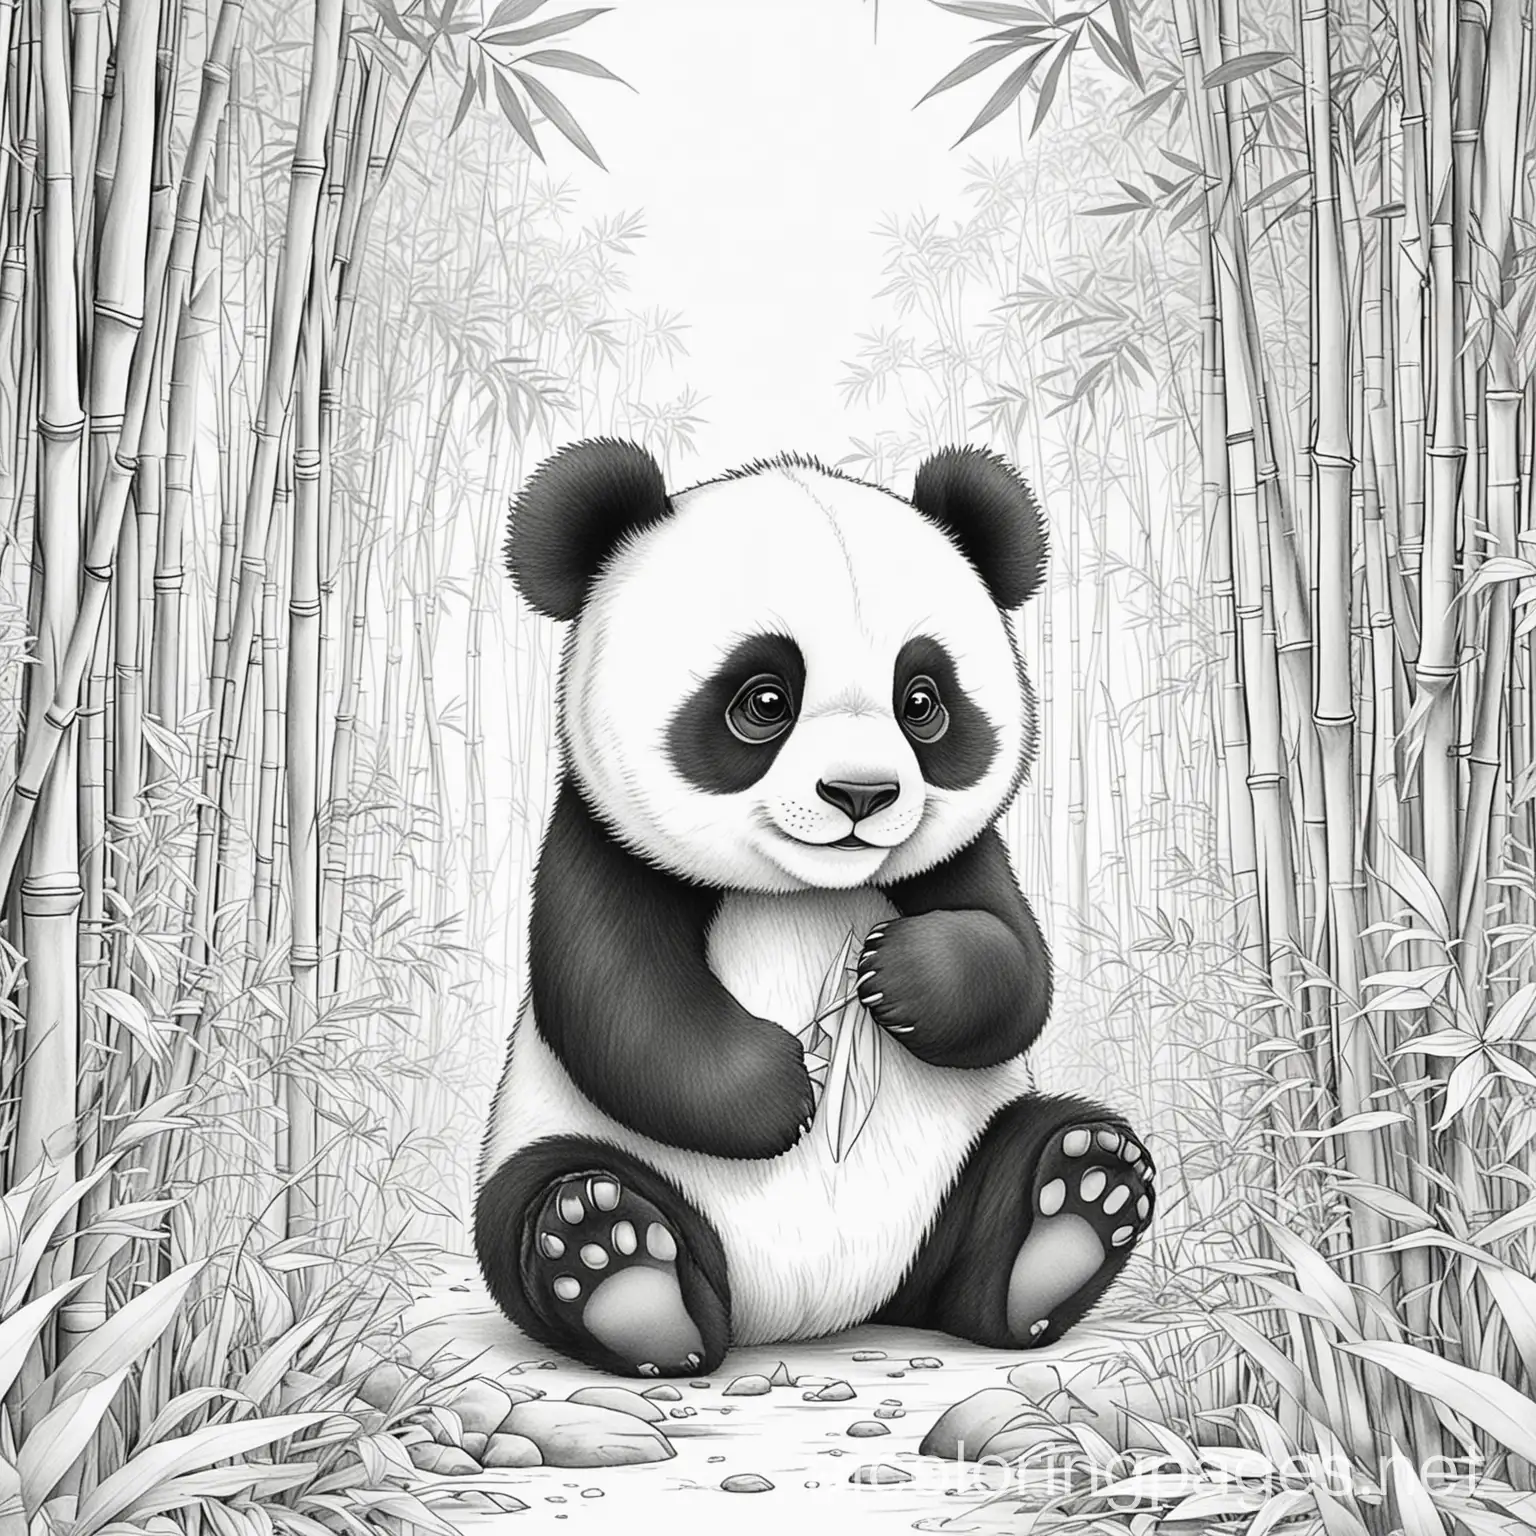 panda in the bamboo forest

, Coloring Page, black and white, line art, white background, Simplicity, Ample White Space. The background of the coloring page is plain white to make it easy for young children to color within the lines. The outlines of all the subjects are easy to distinguish, making it simple for kids to color without too much difficulty